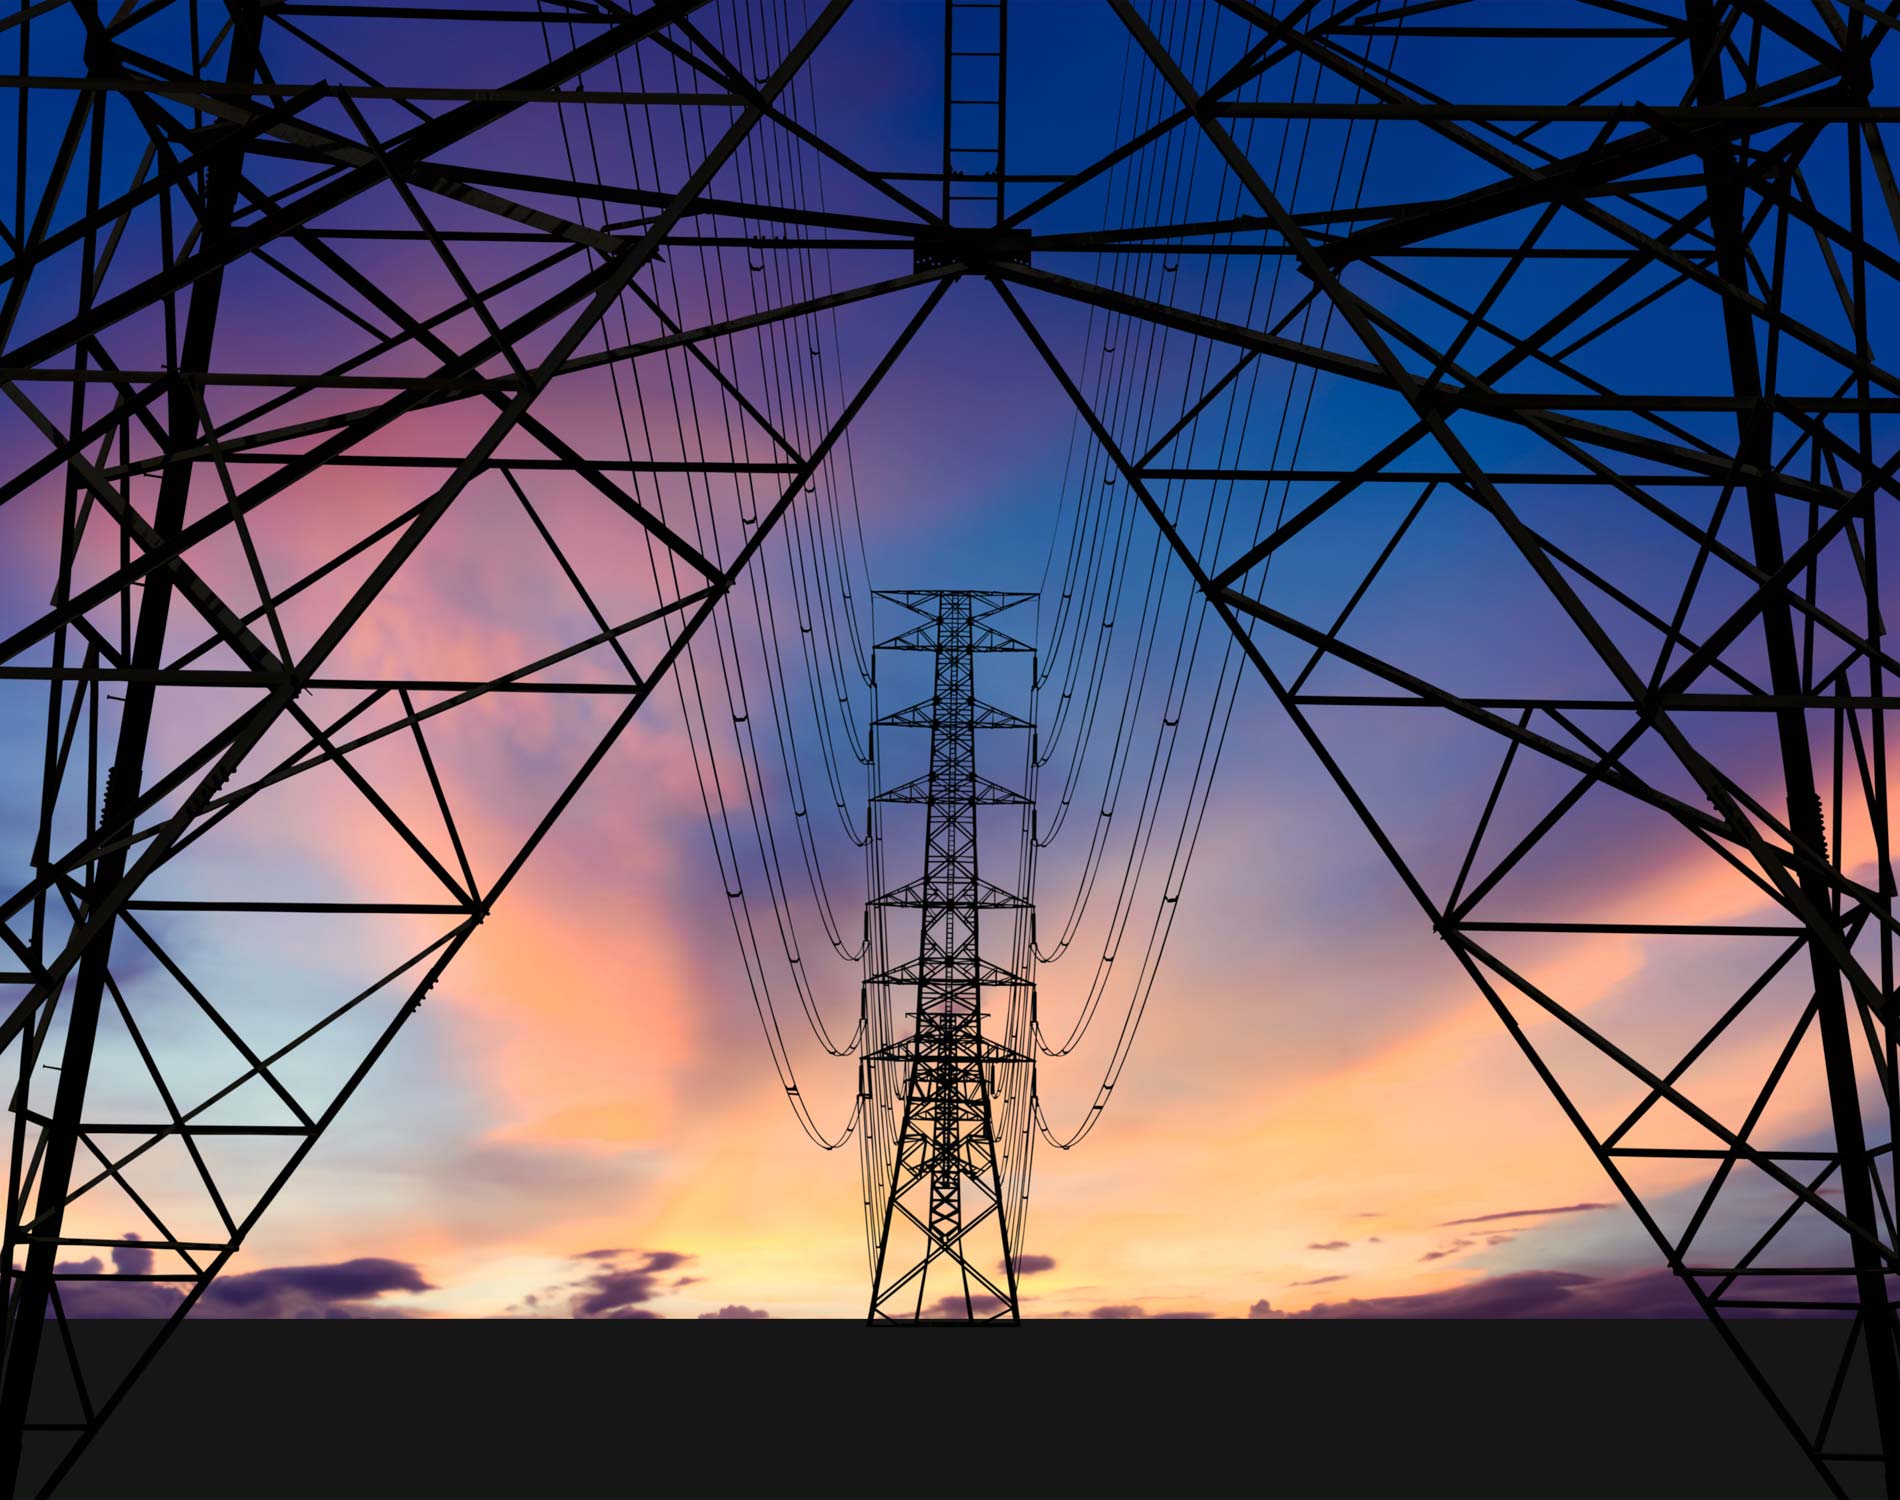 /-/media/images/website/background-images/industry-sectors/energy/energy_electric_towers.ashx?sc_lang=pl-pl